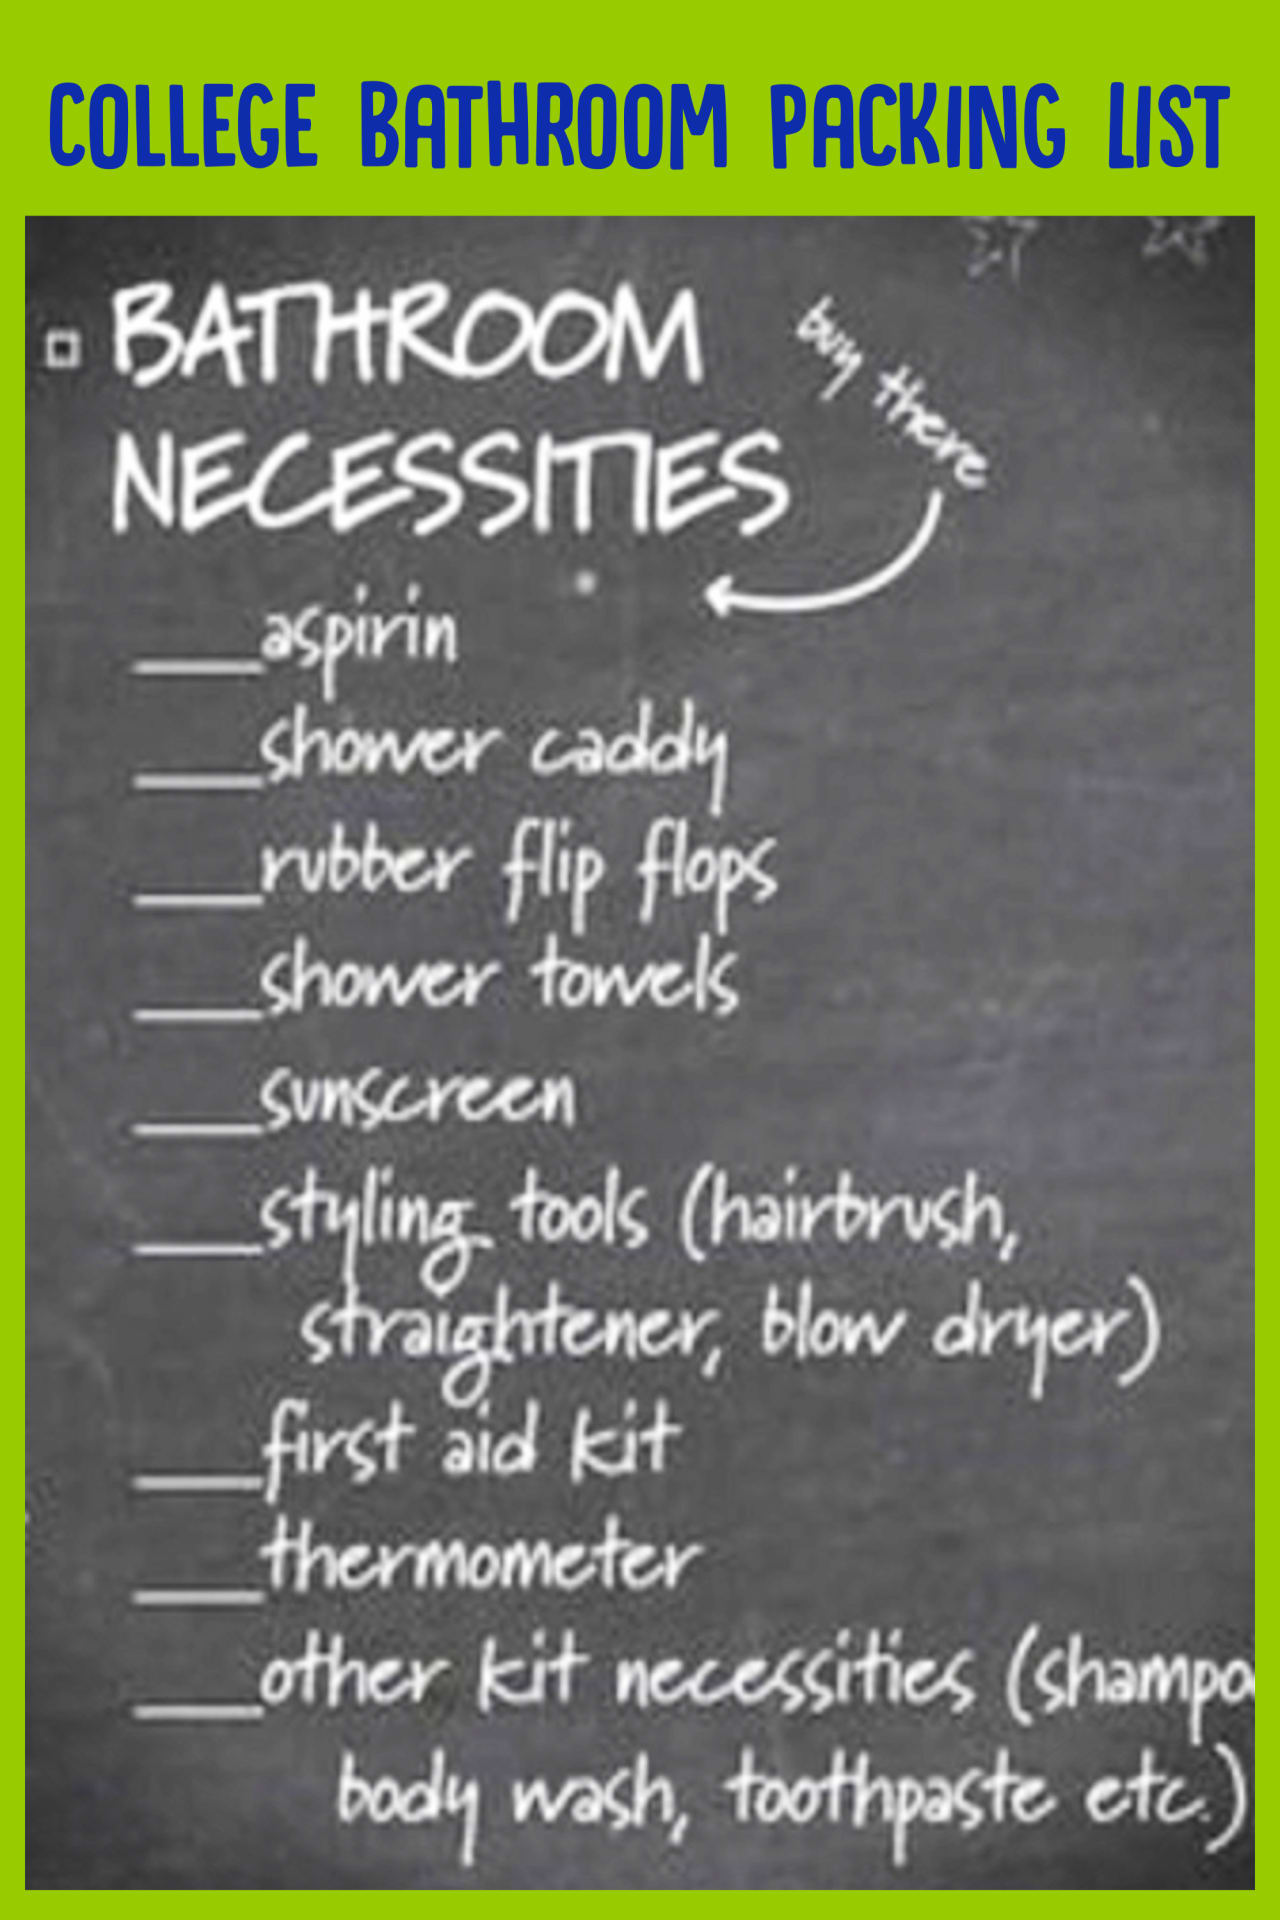 College Packing List - what to pack for dorm bathroom freshman year